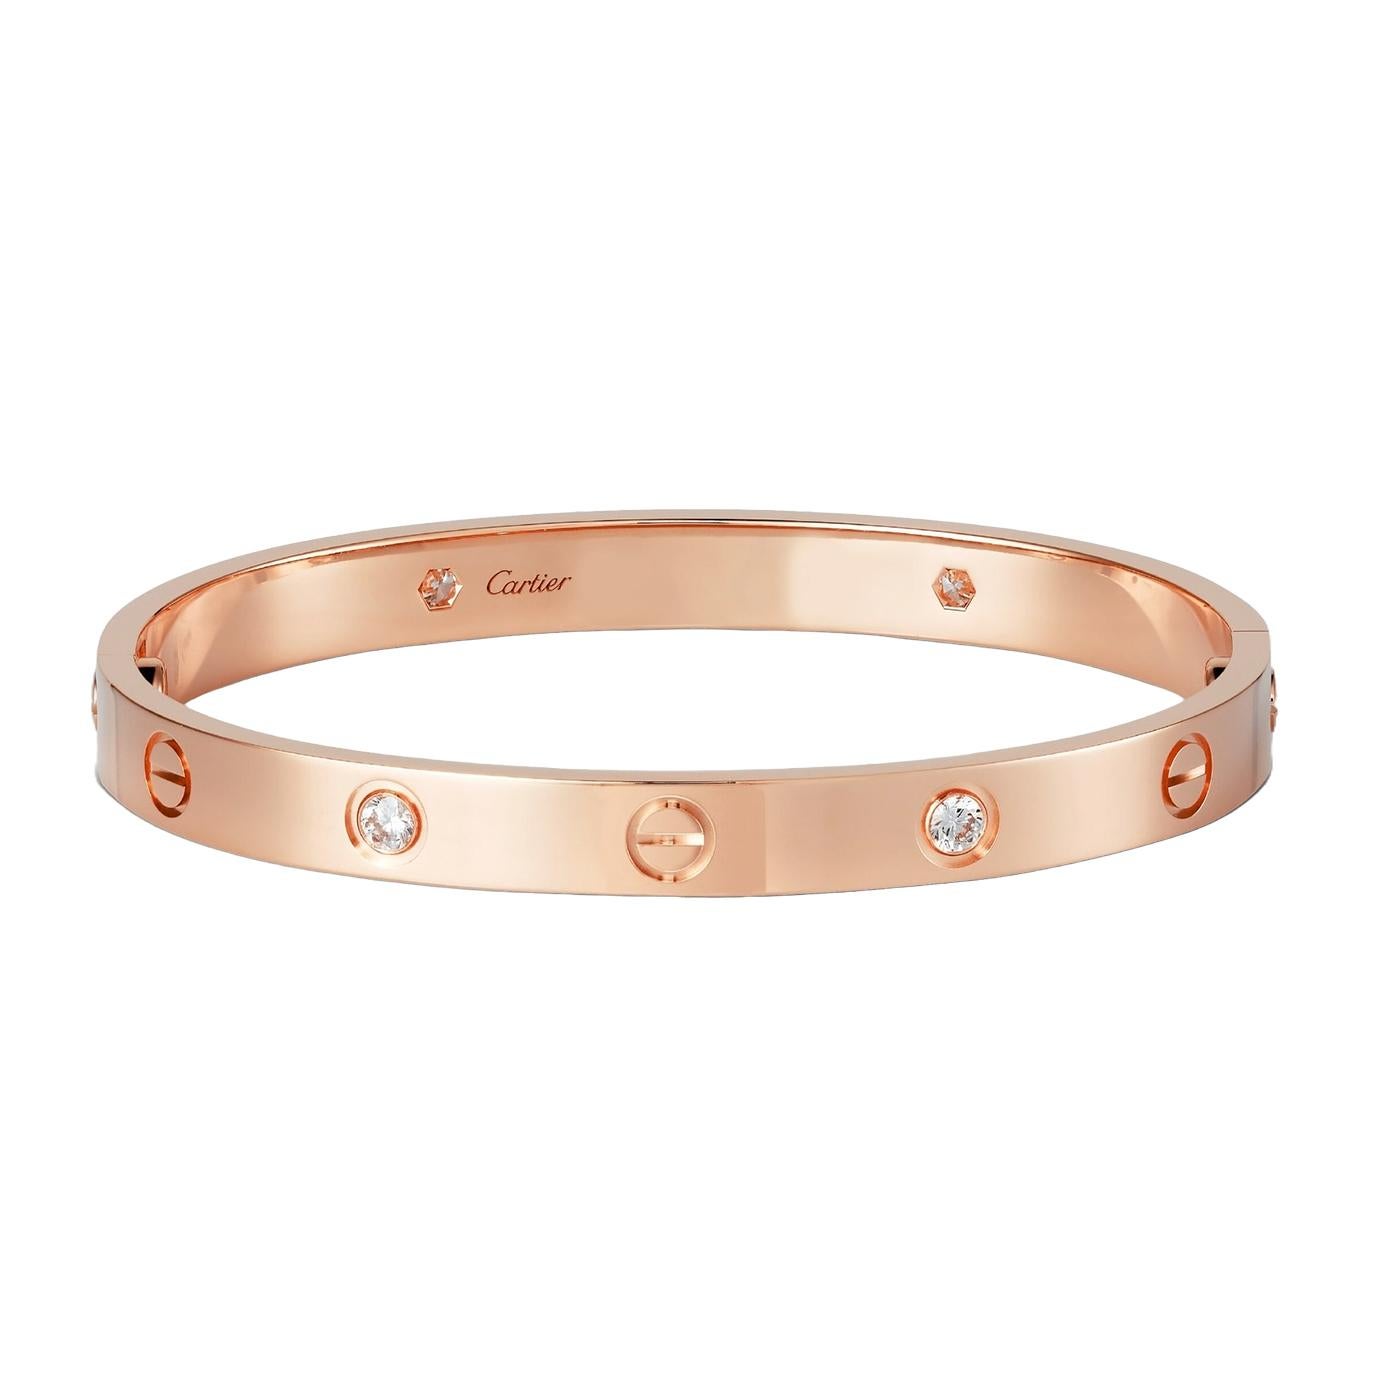 LOVE bracelet, 18K rose gold (750/1000), set with 4 brilliant-cut diamonds totaling 0.42 carats. Comes with a screwdriver. Width: 6.1 mm. Created in New York in 1969, the LOVE bracelet is an icon of jewelry design: a close-fitting, oval bracelet